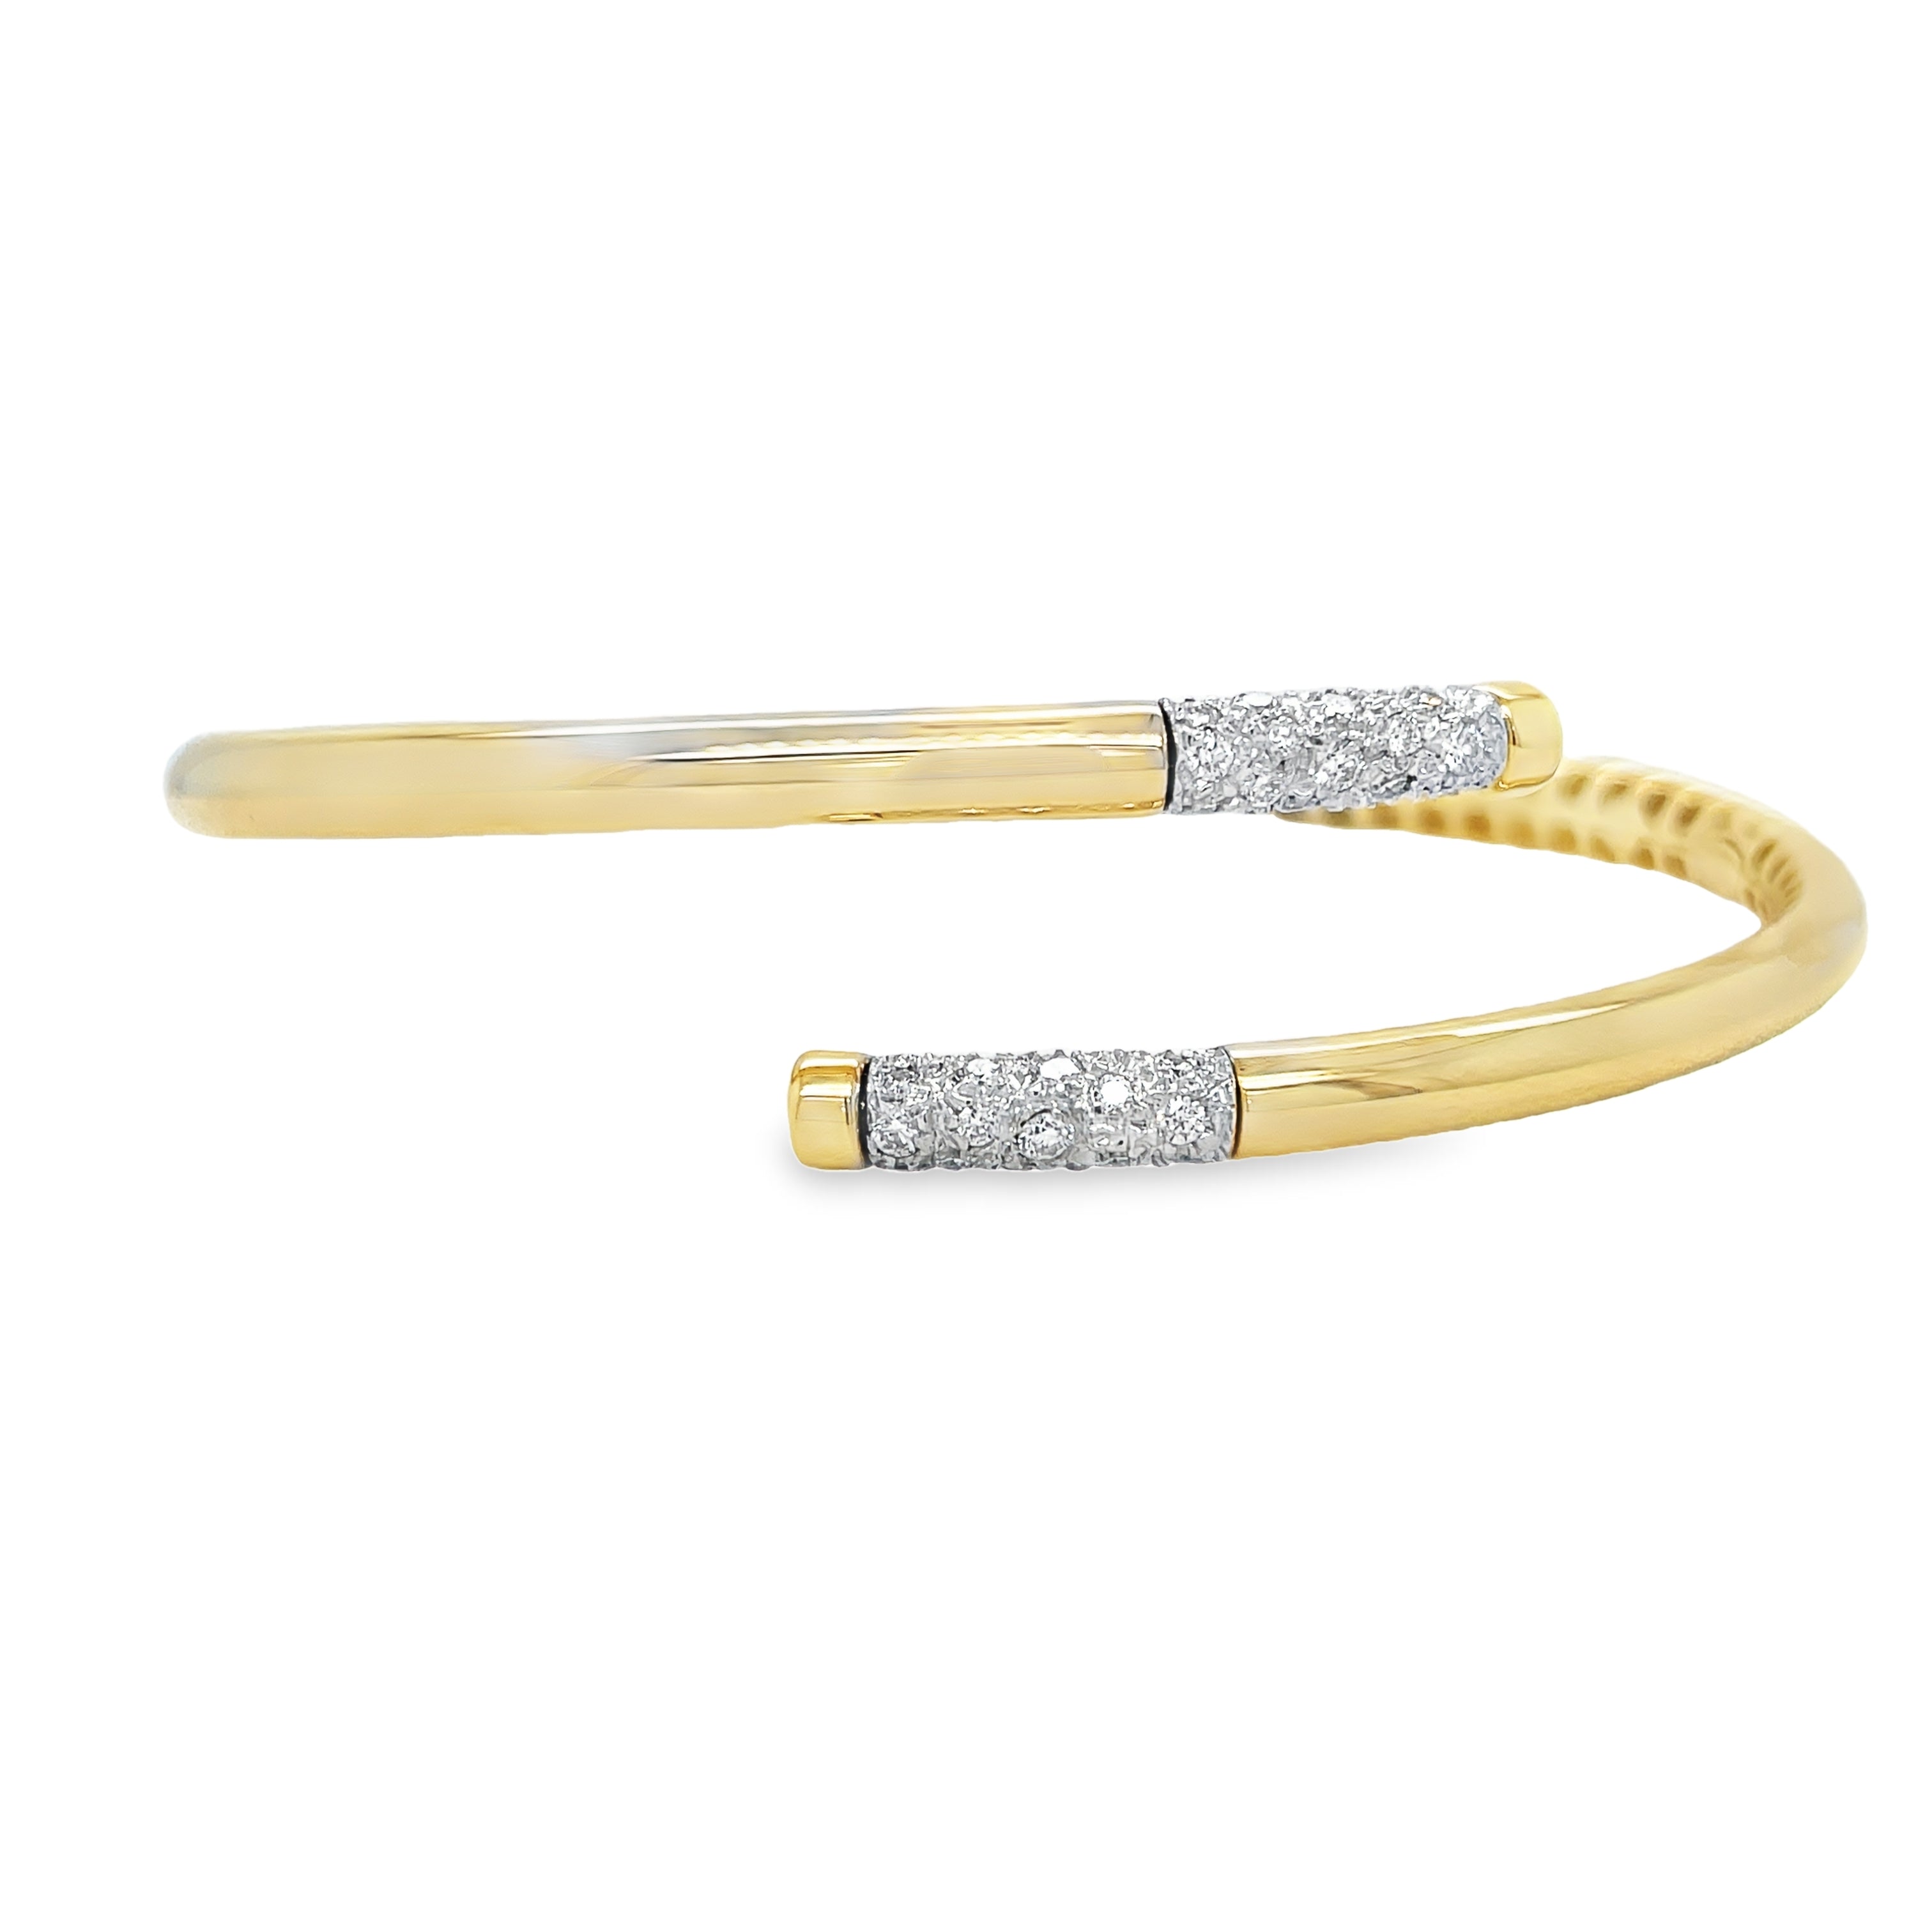 Elevate your accessory game with our 14k Italian Yellow Gold Diamond Bangle Bracelet. Crafted in Italy, this piece showcases a hinged system for easy wear and dazzling round diamonds cts in an H/SI1 quality. Make a statement with our Veneroso Collection.